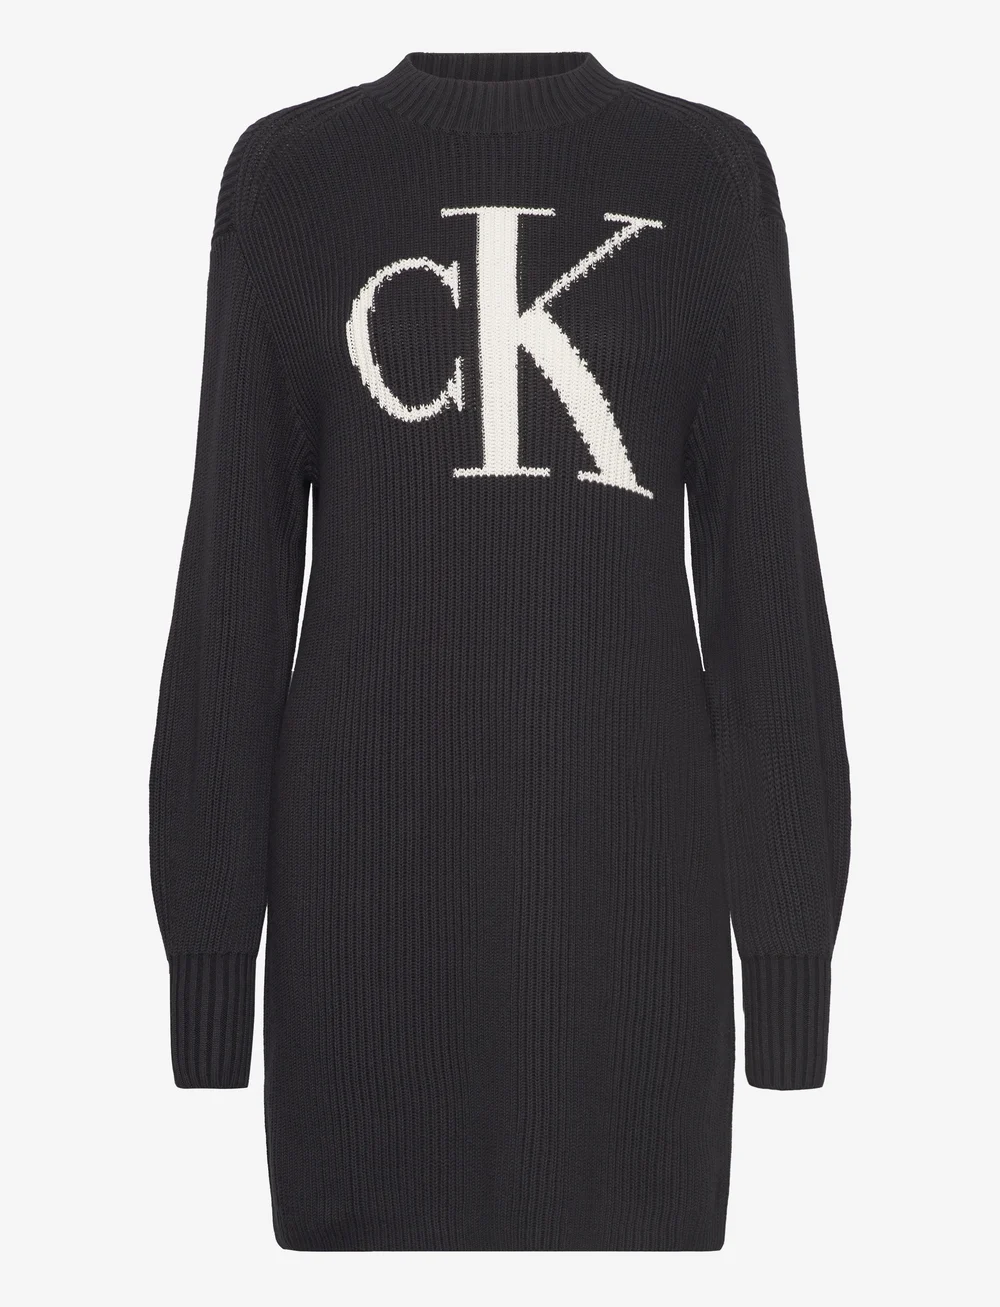 Calvin Klein Jeans Ck Intarsia Loose Sweater Dress - Knitted dresses